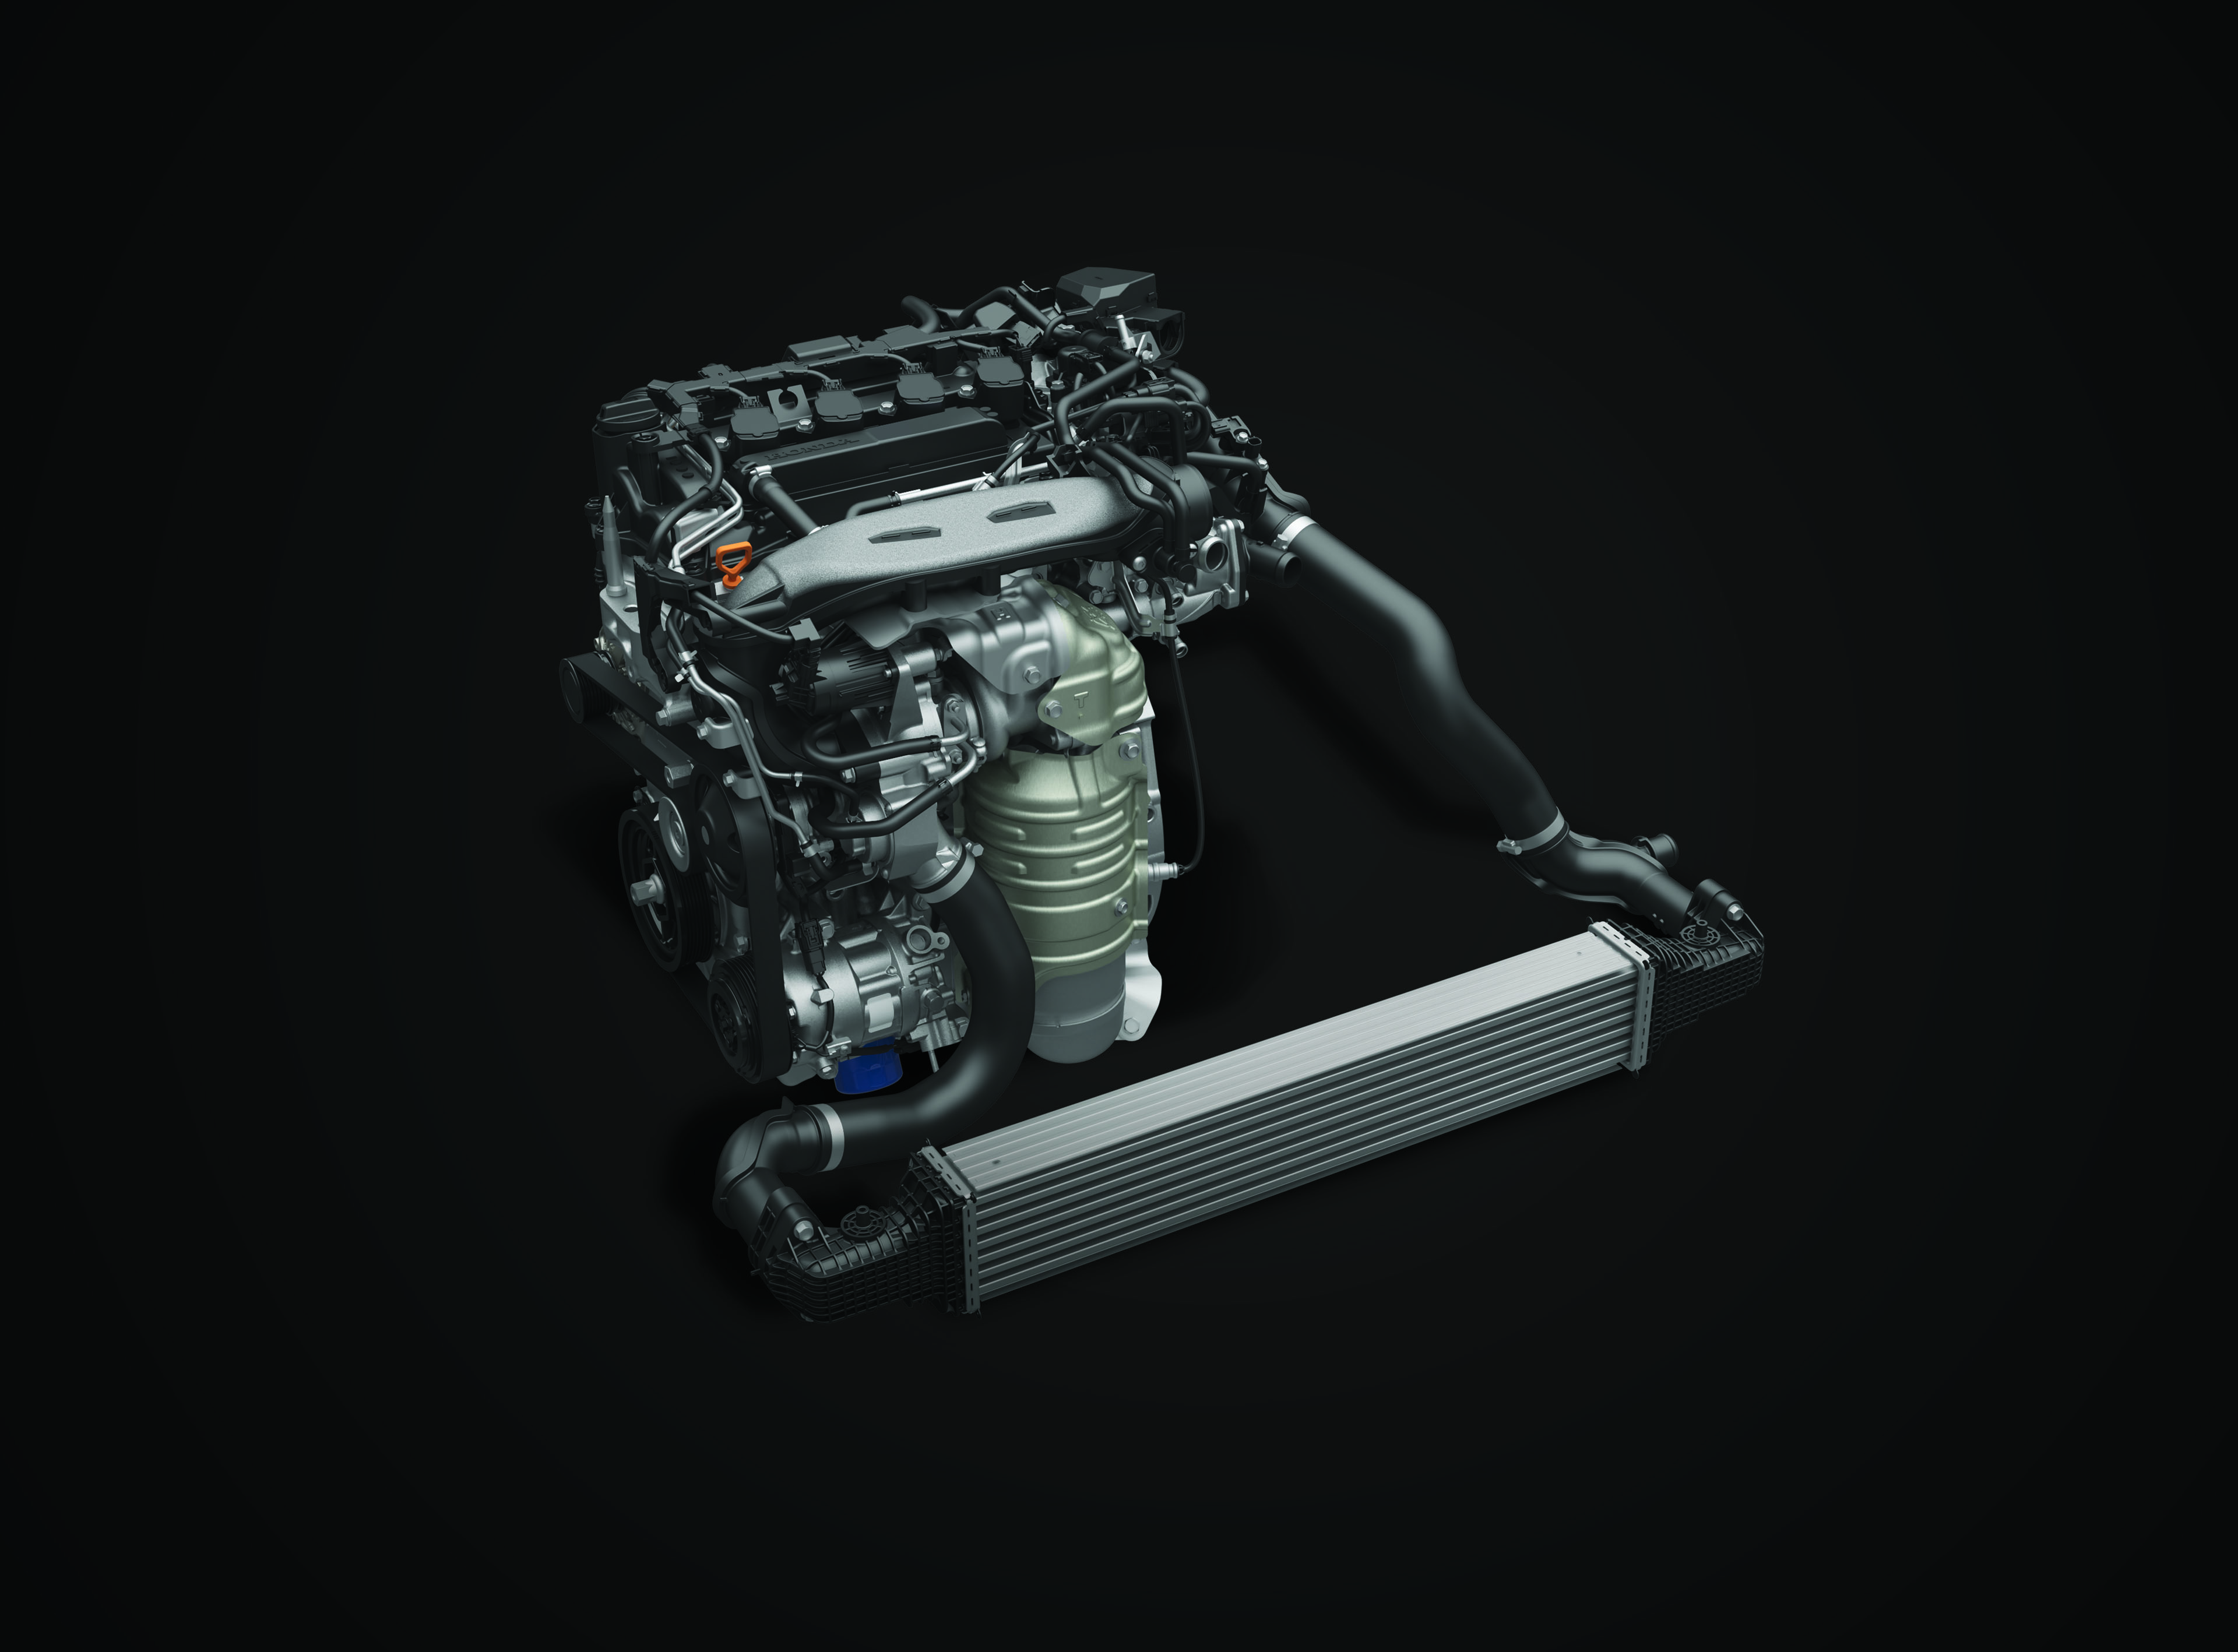 The All-New Civic now comes with the enhanced 1.5L VTEC Turbocharged engine.